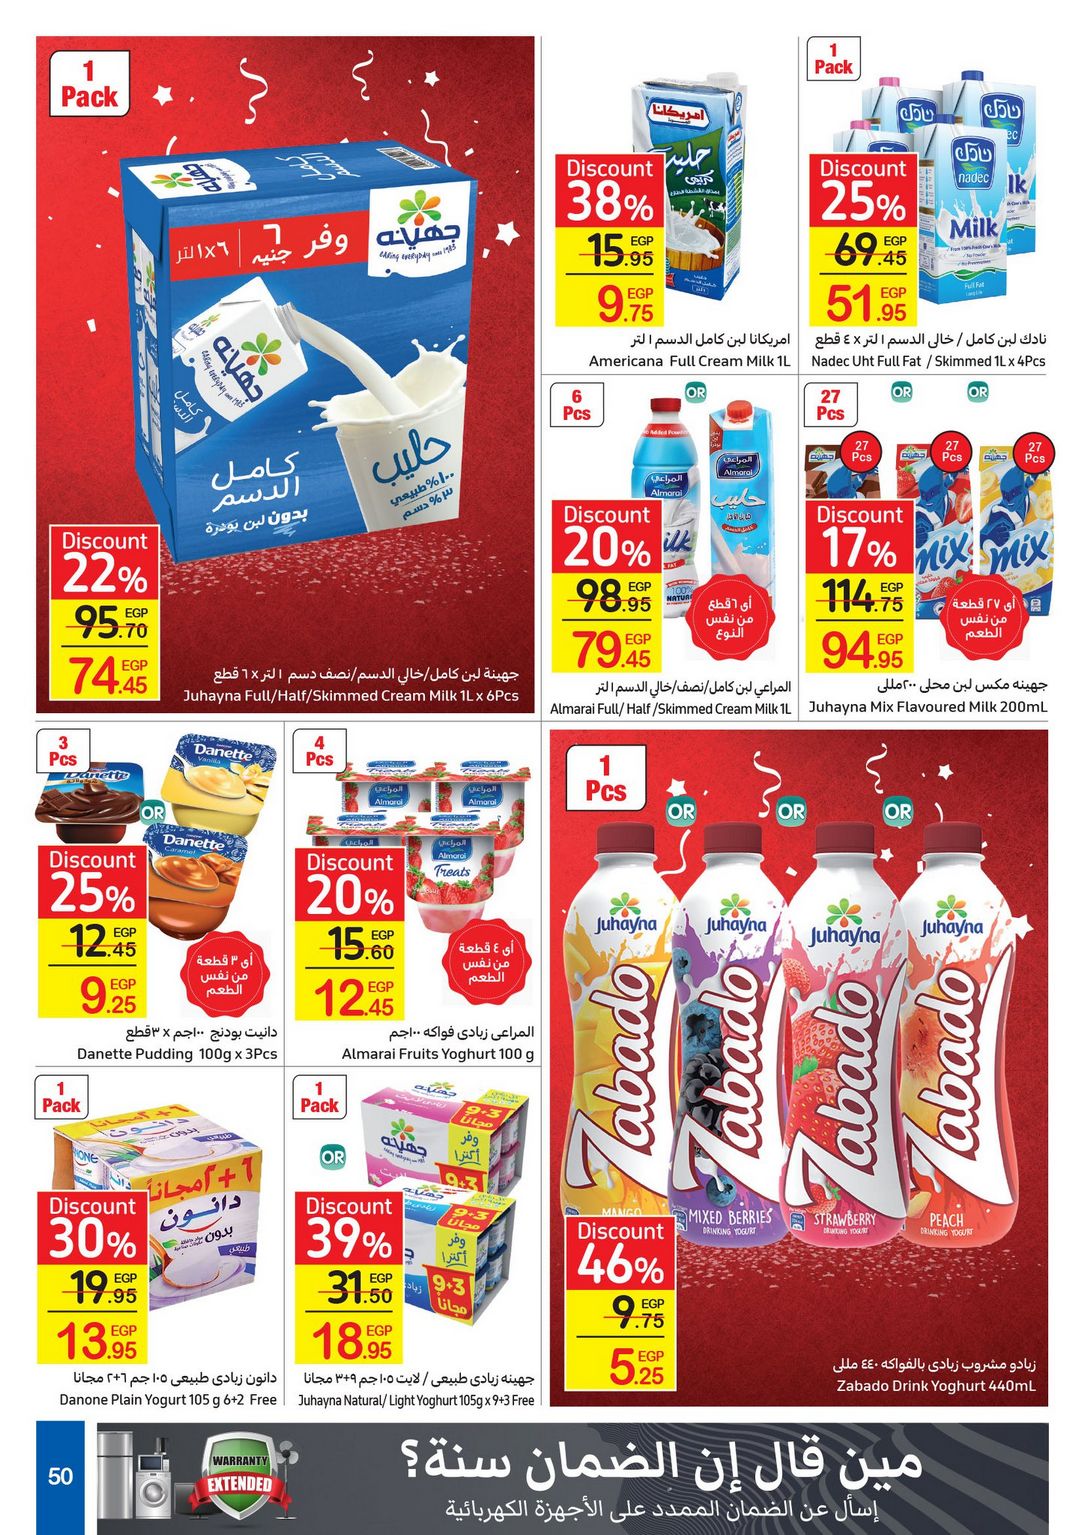 Carrefour Anniversary Offers till 18/2/2021 | Carrefour Egypt 52